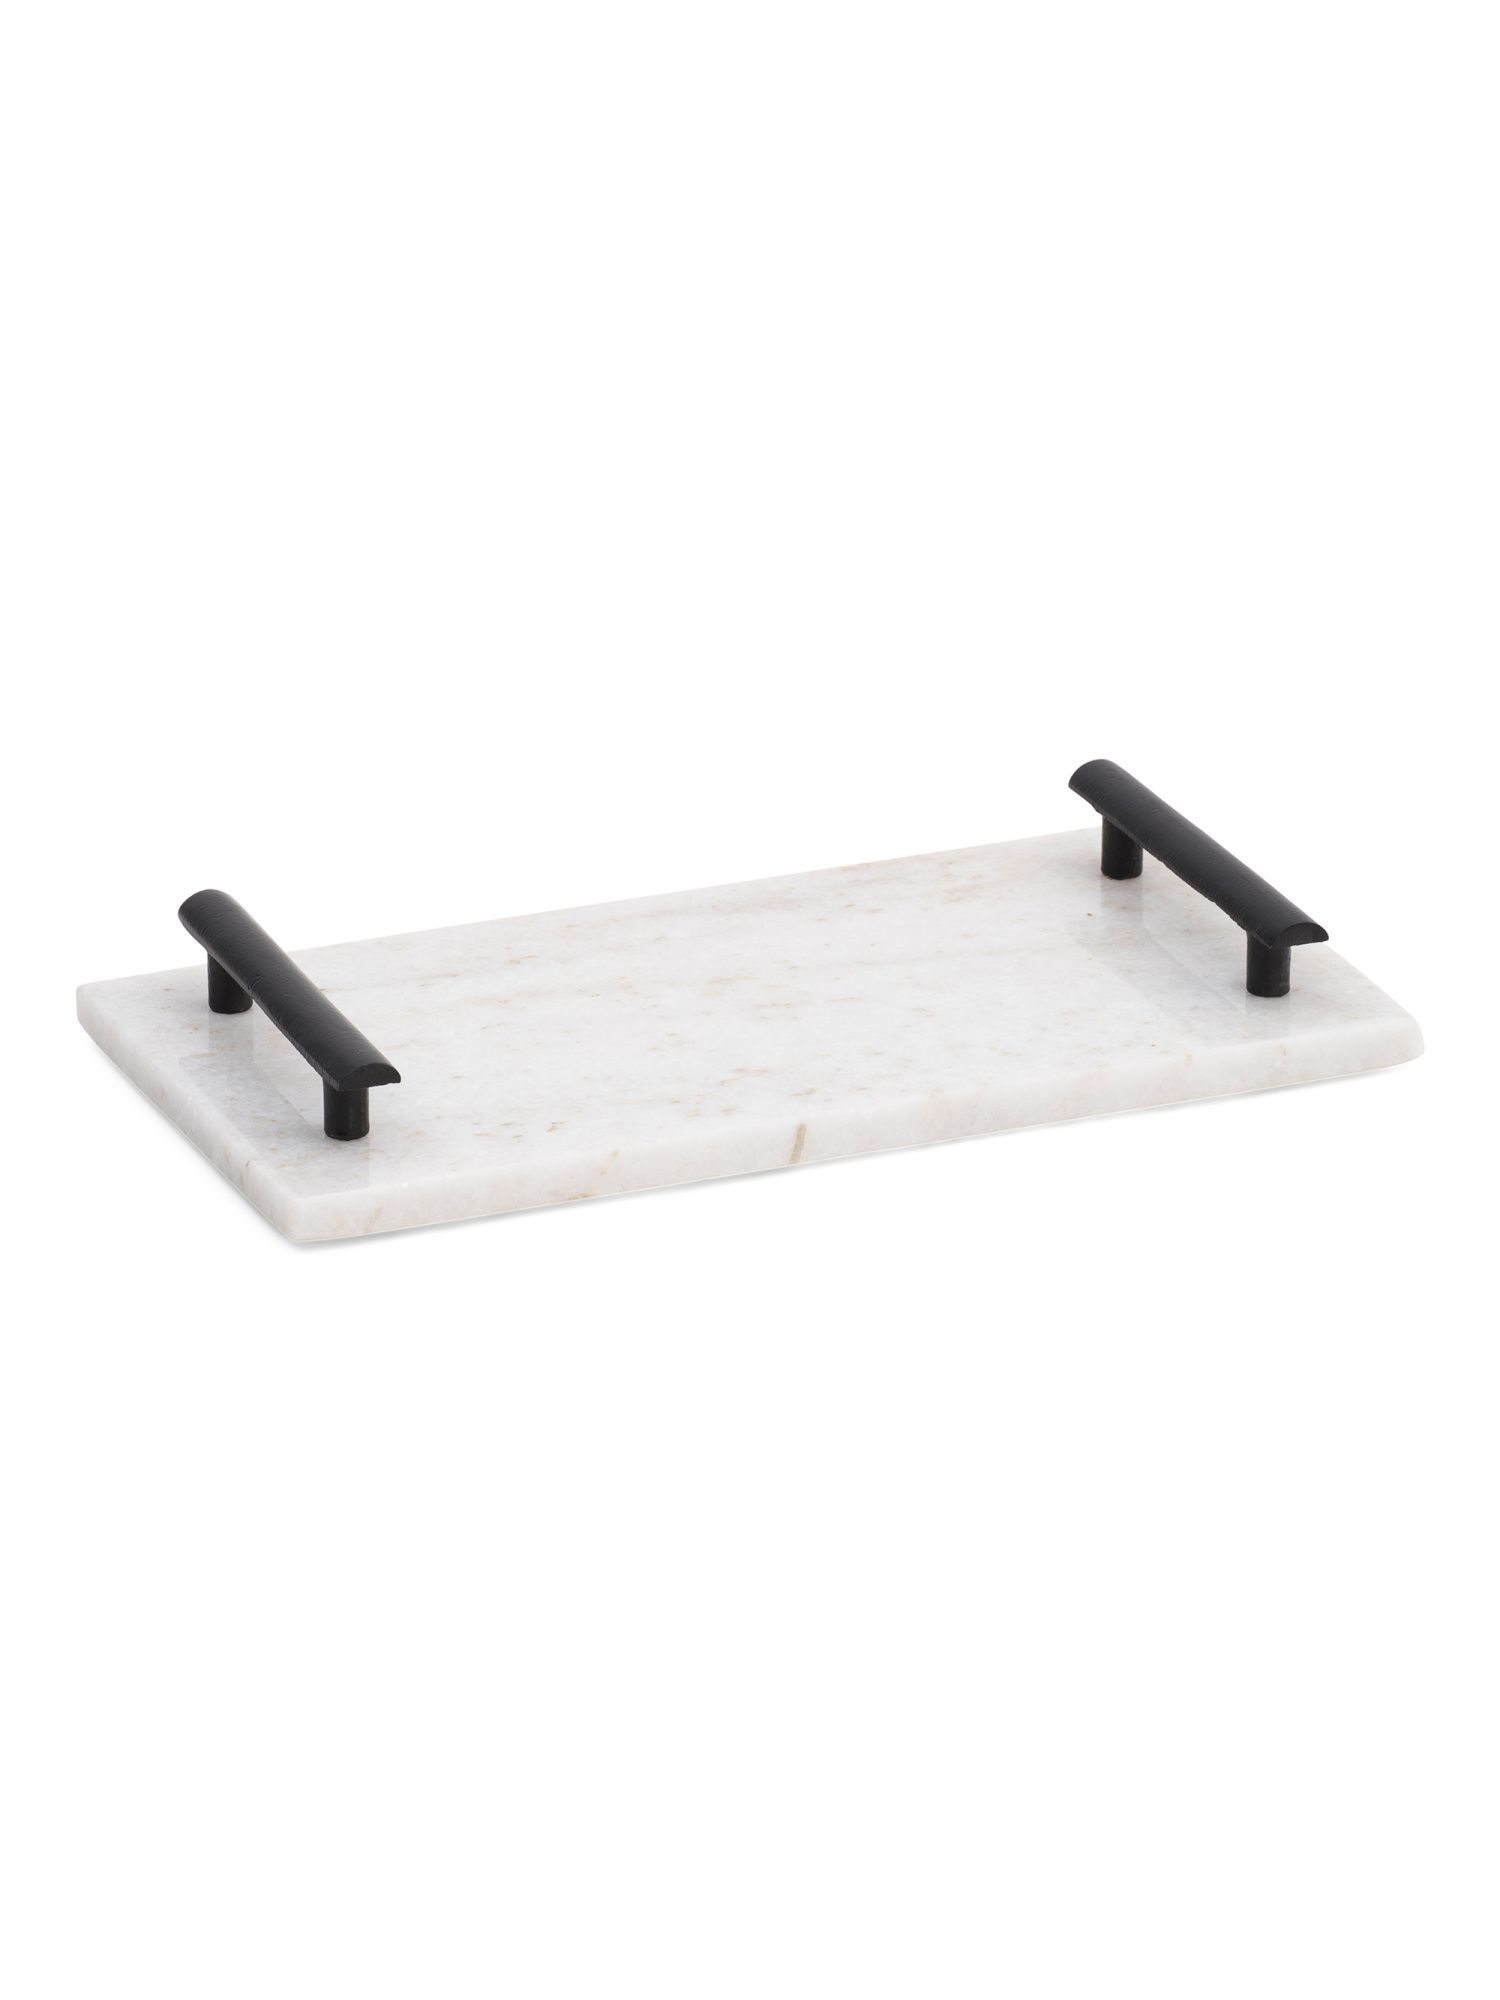 Solid Marble Vanity Tray With Handles | TJ Maxx